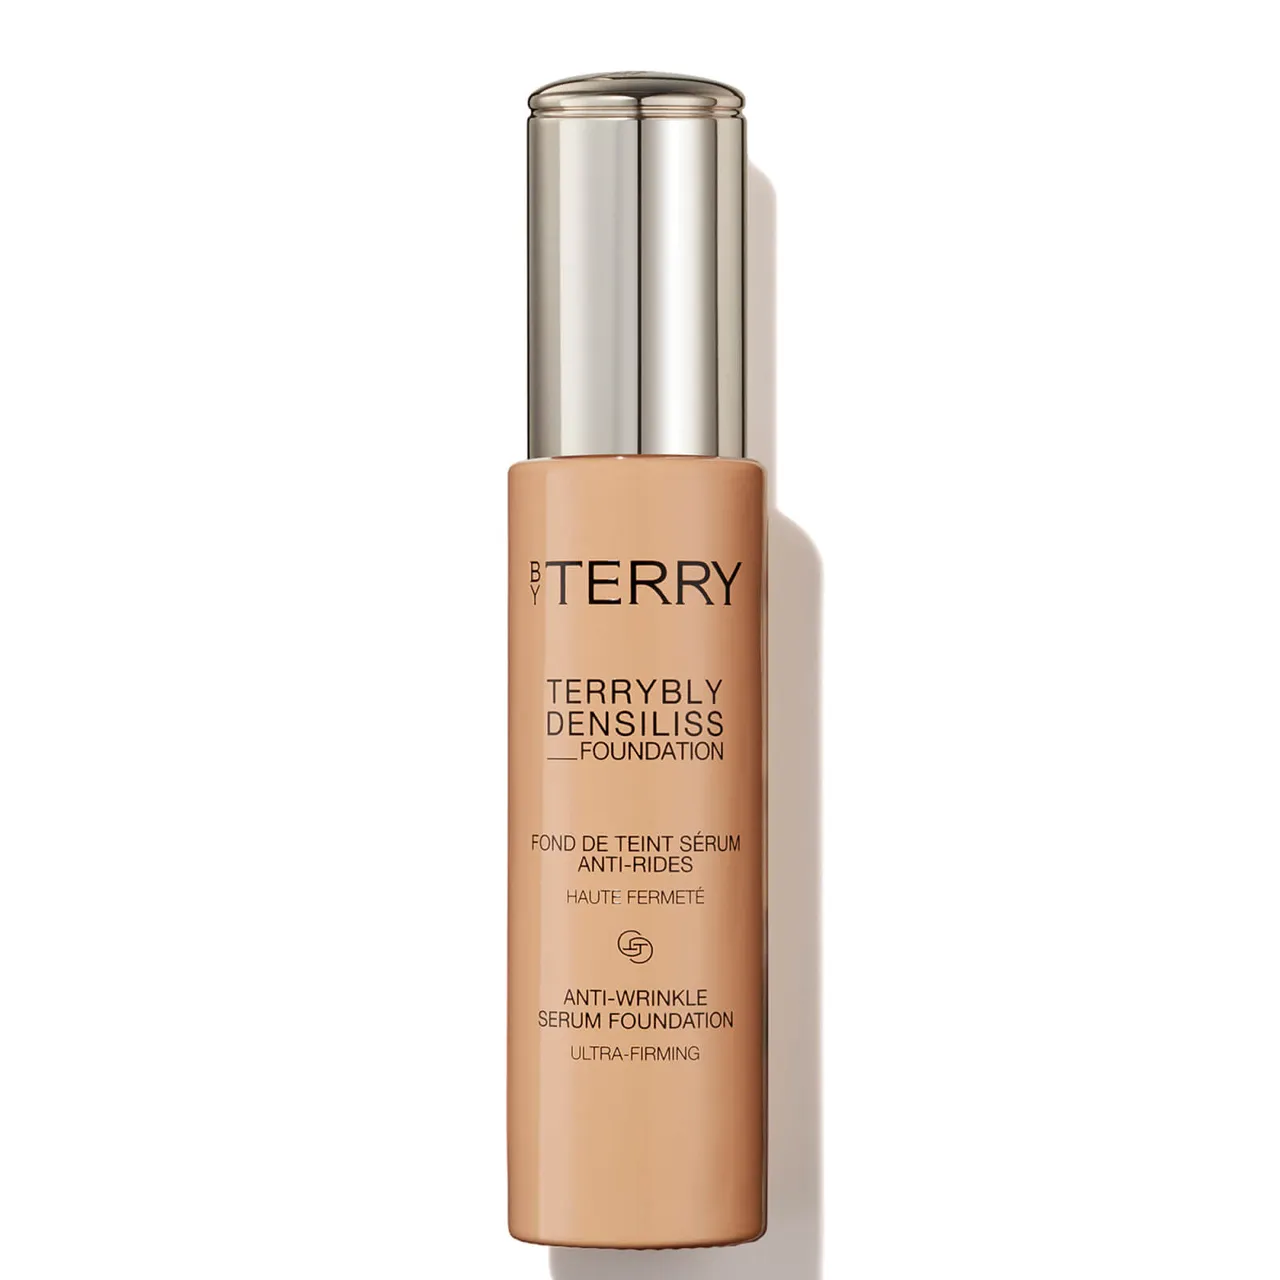 By Terry Terrybly Densiliss Foundation 30ml (Various Shades) - 2. Cream Ivory